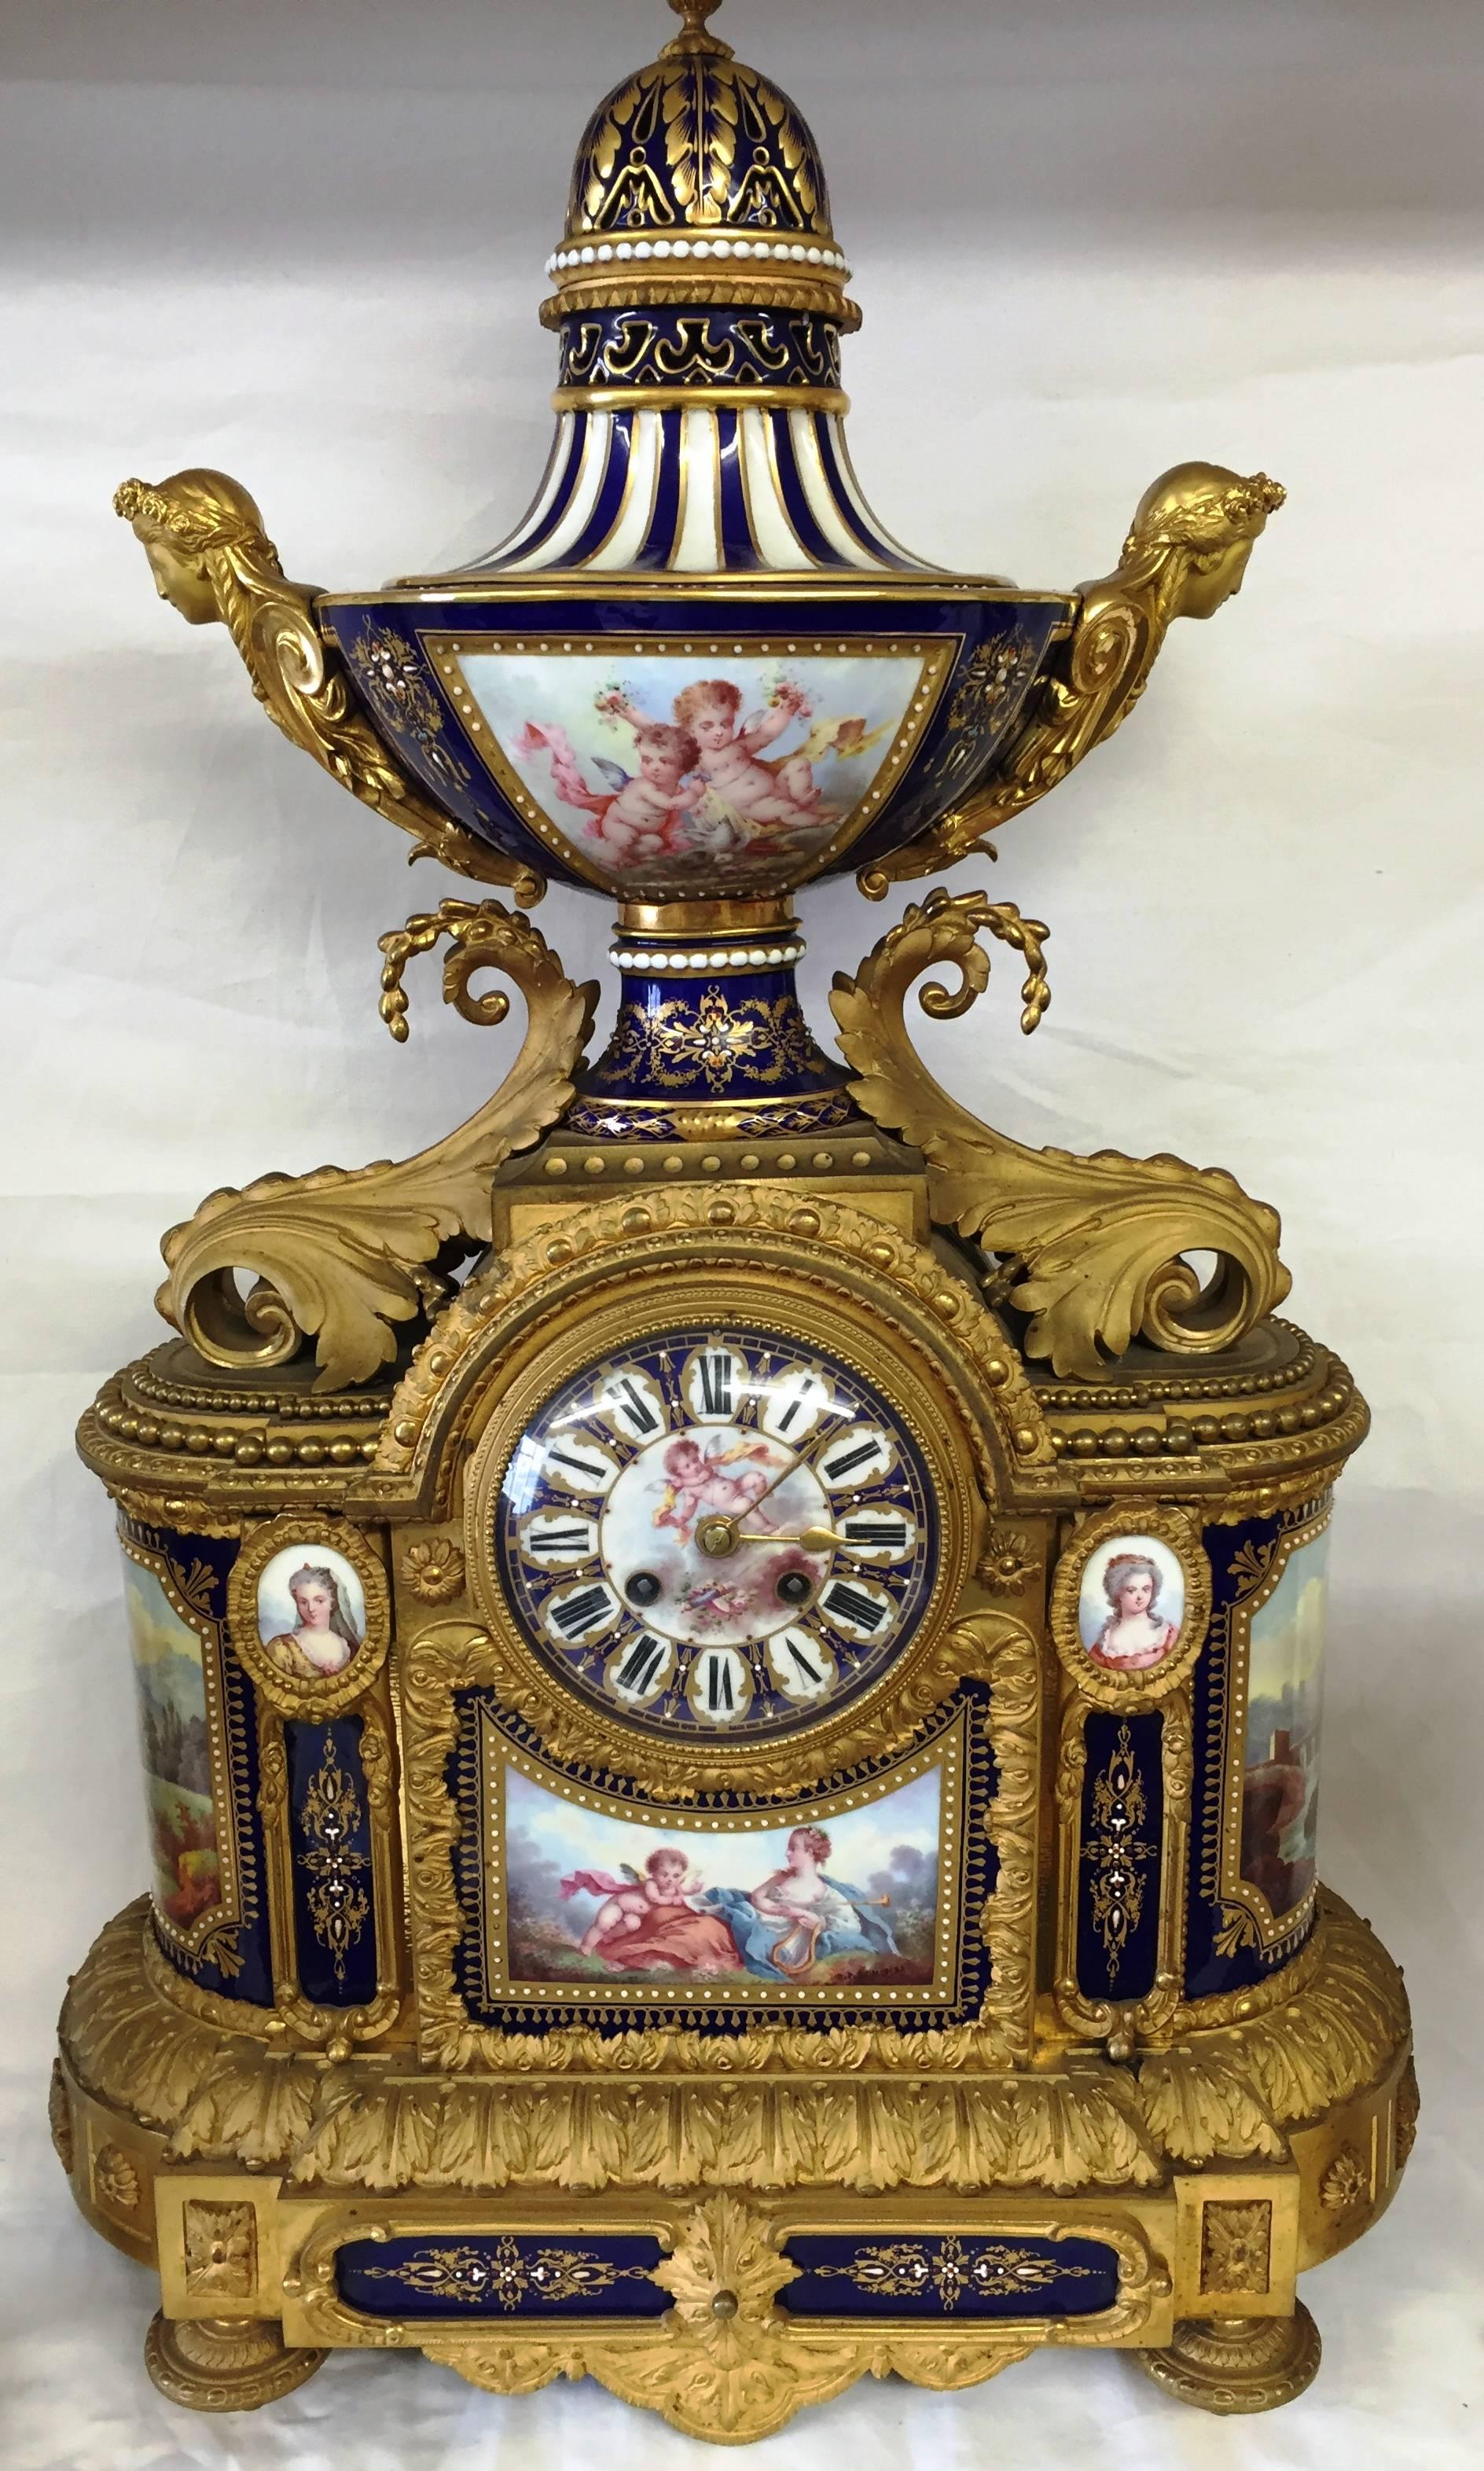 A fine quality 19th century French Sevres porcelain and gilded ormolu clock garniture. Having a very impressive pair of five branch candelabra each with urns depicting romantic scenes, a pair of lidded urns and this wonderful clock to the center.